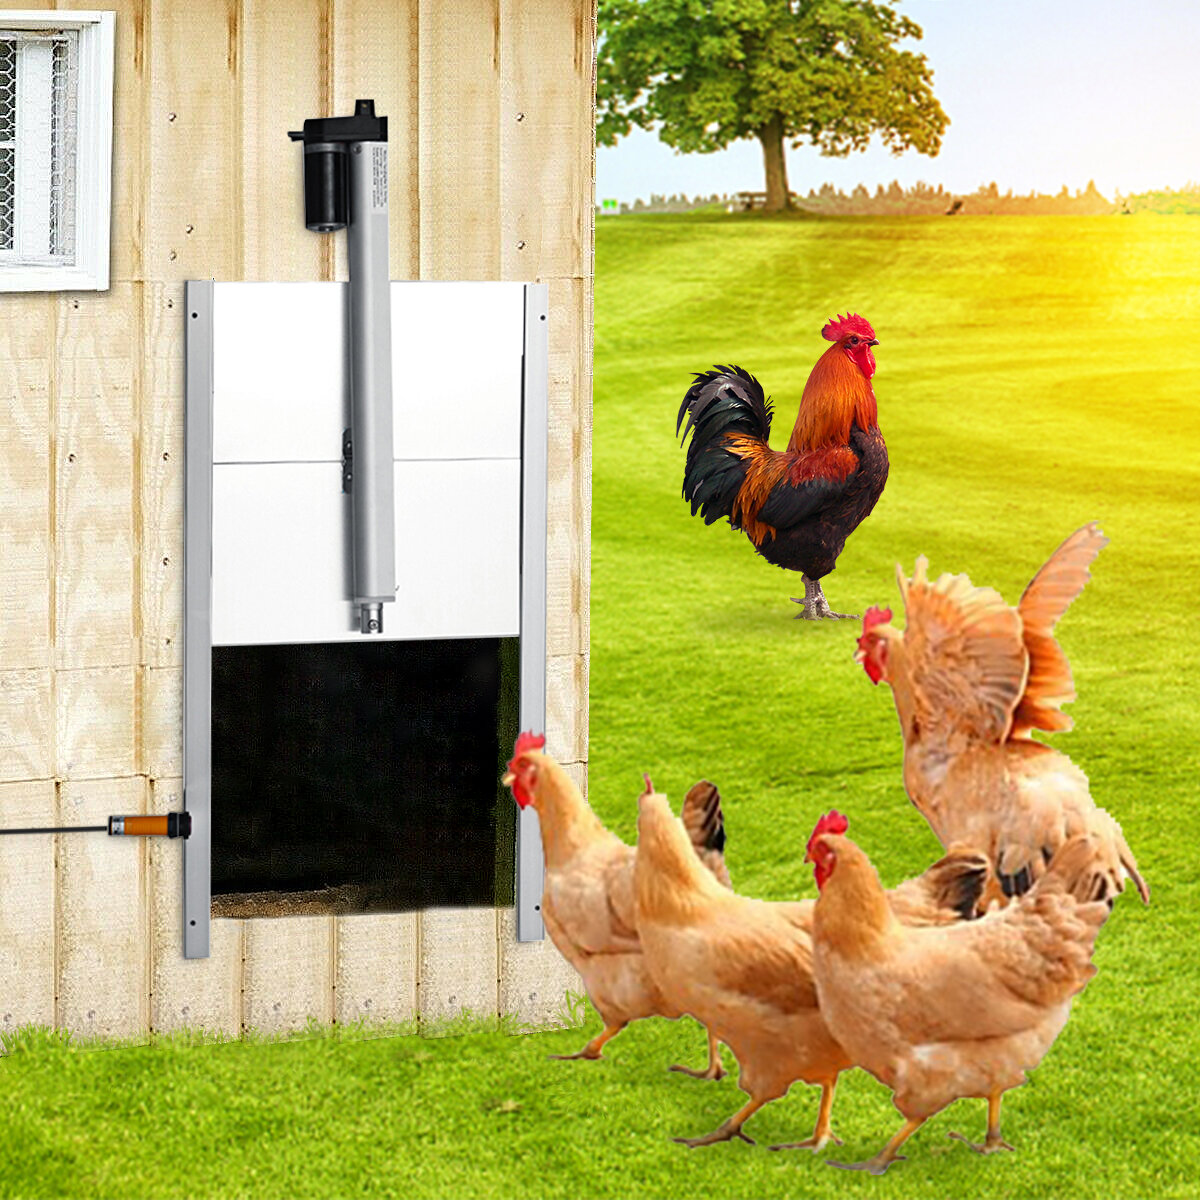 

110V-220V 66W Metal Automatic Chicken Coop Door Auto Opener Metal Cage Closer Timer infrared Pet Supplies